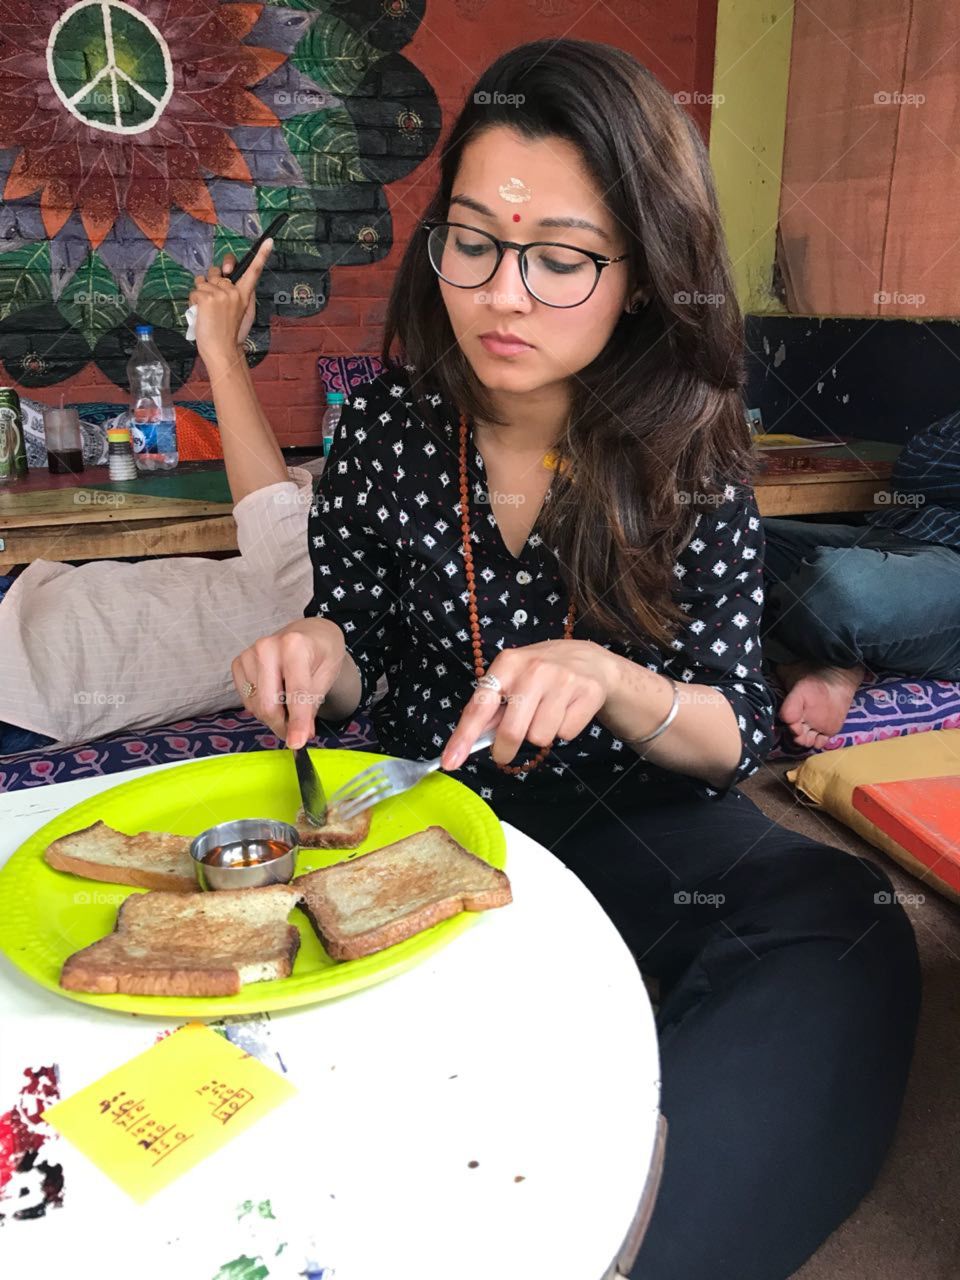 spiritual meal ,
This image at varanasi 
assi ghat 
Hunger 
honey bread 
vermillion on head 
focus to food
zara outfit 
ray ban glasses